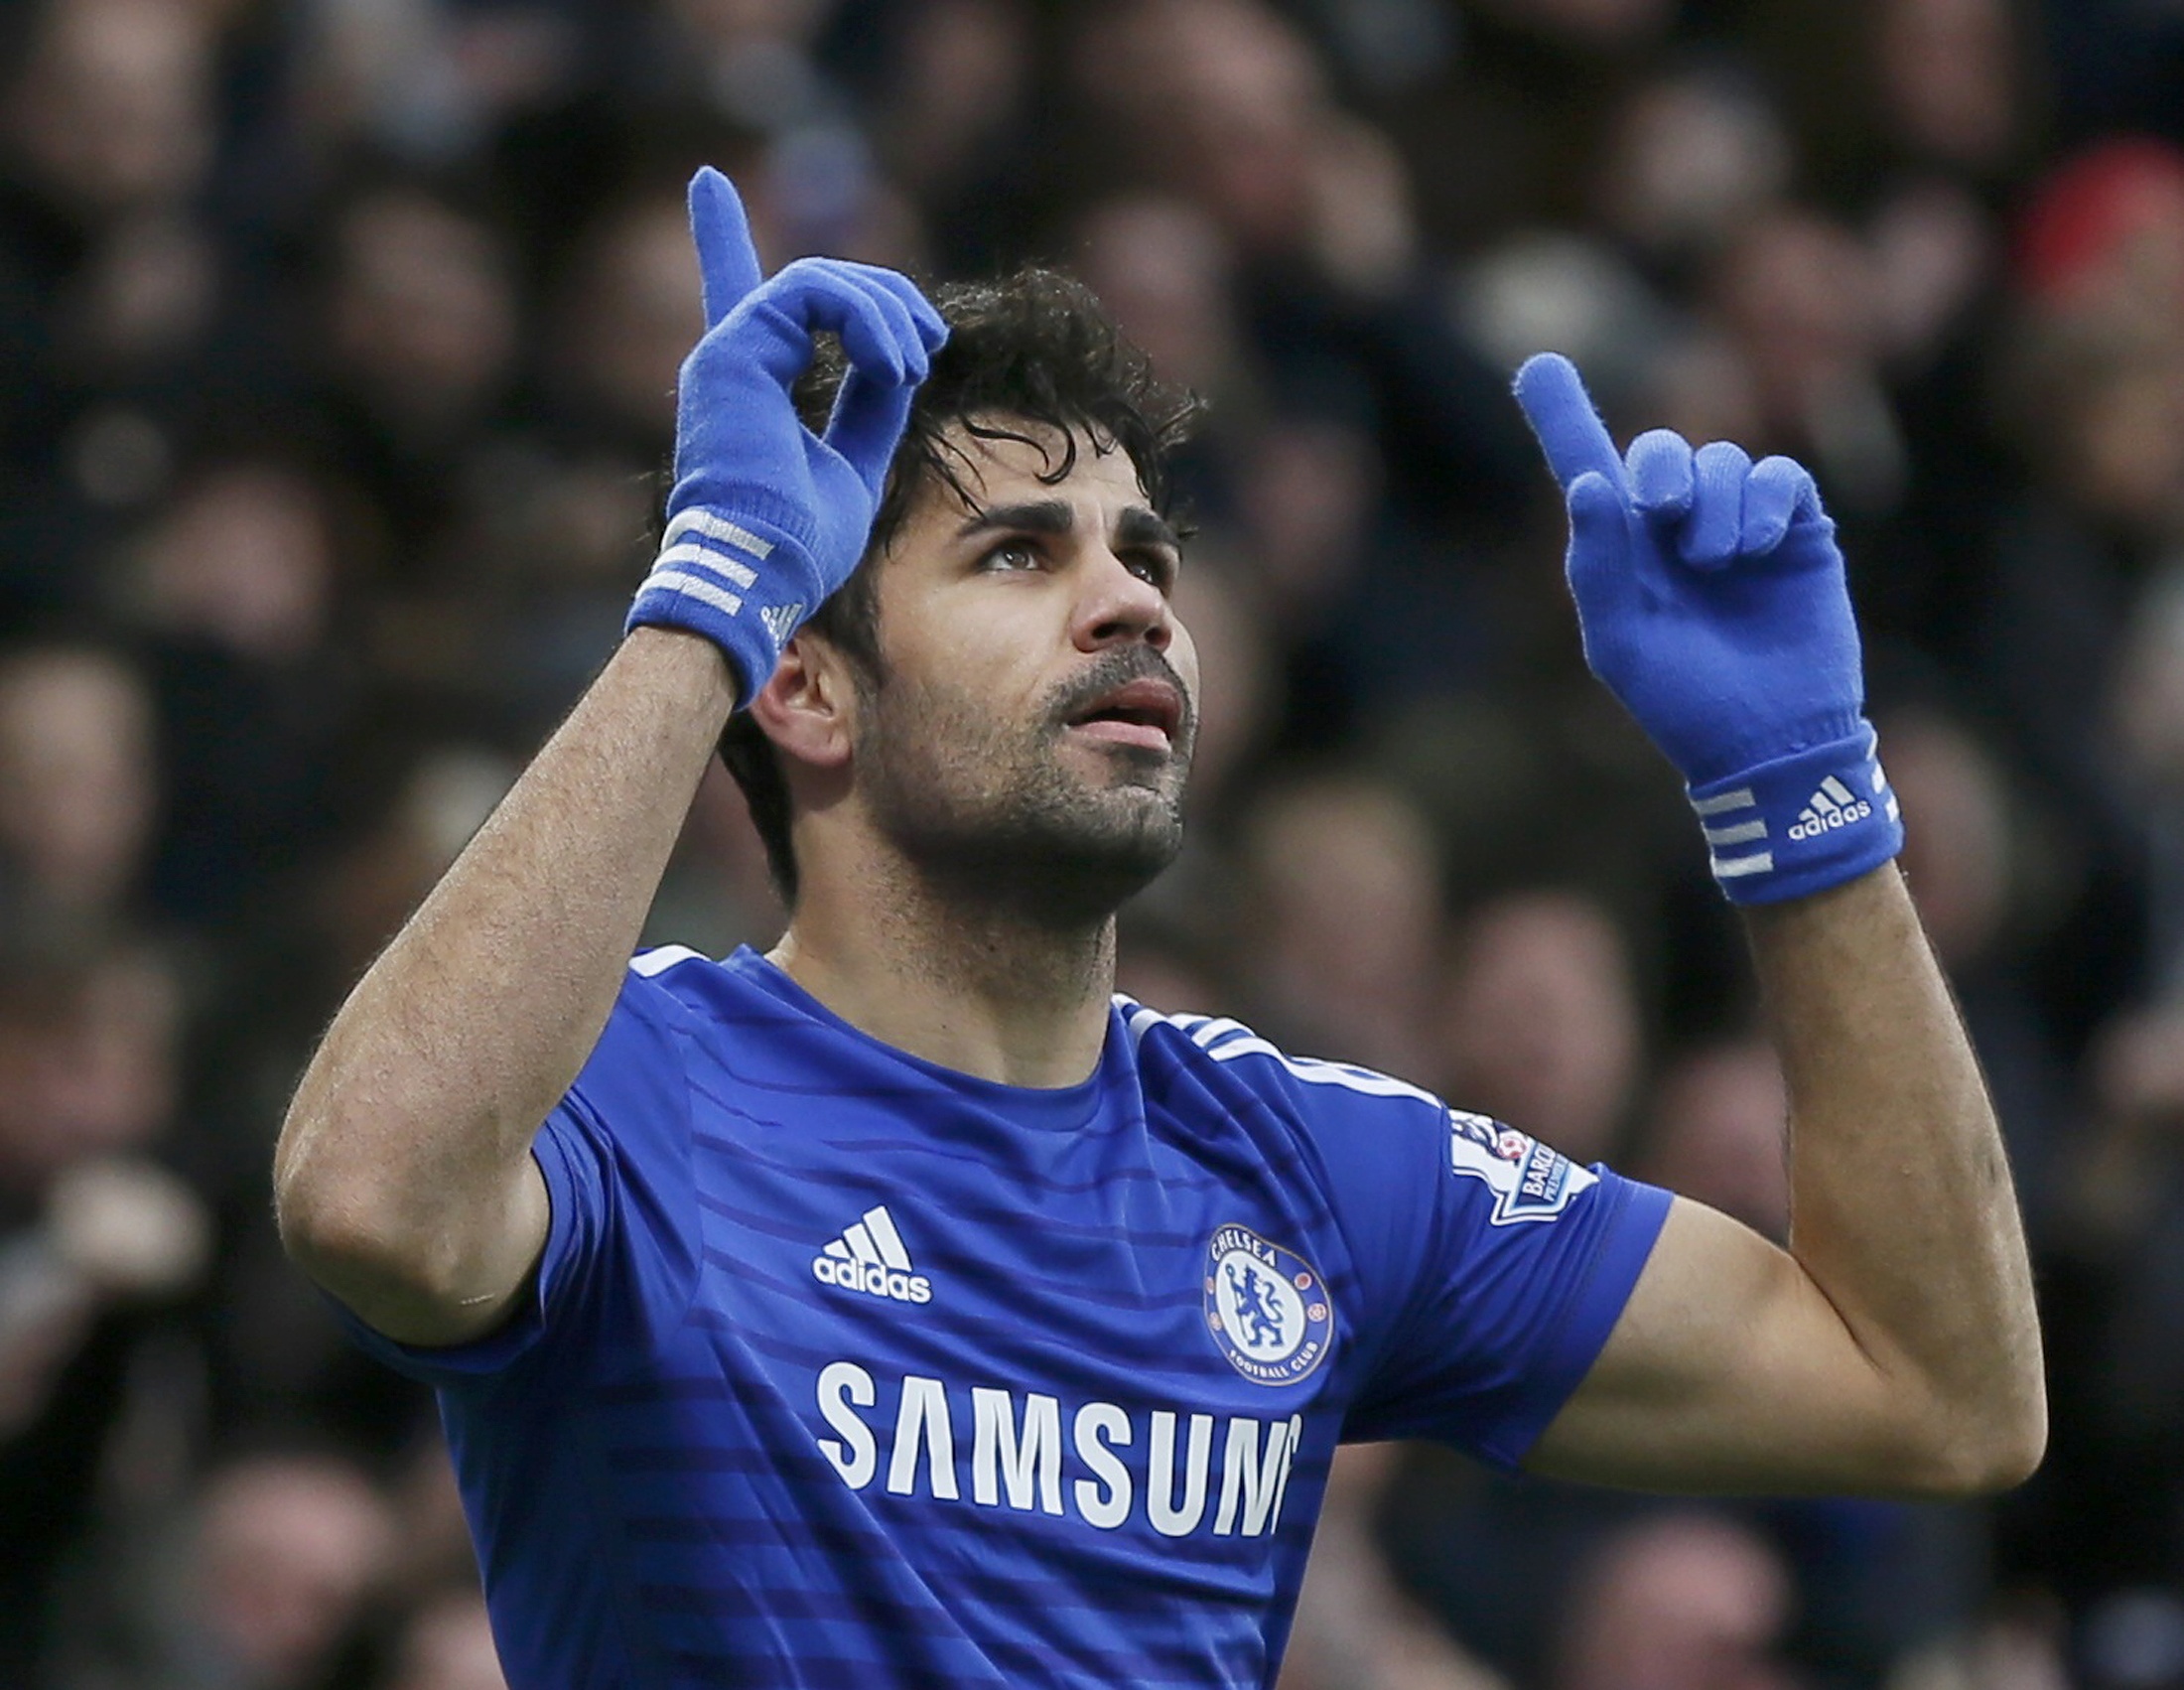 Chelsea's Diego Costa celebrates after scoring a goal against West Ham United during their English Premier League soccer match at Stamford Bridge in London